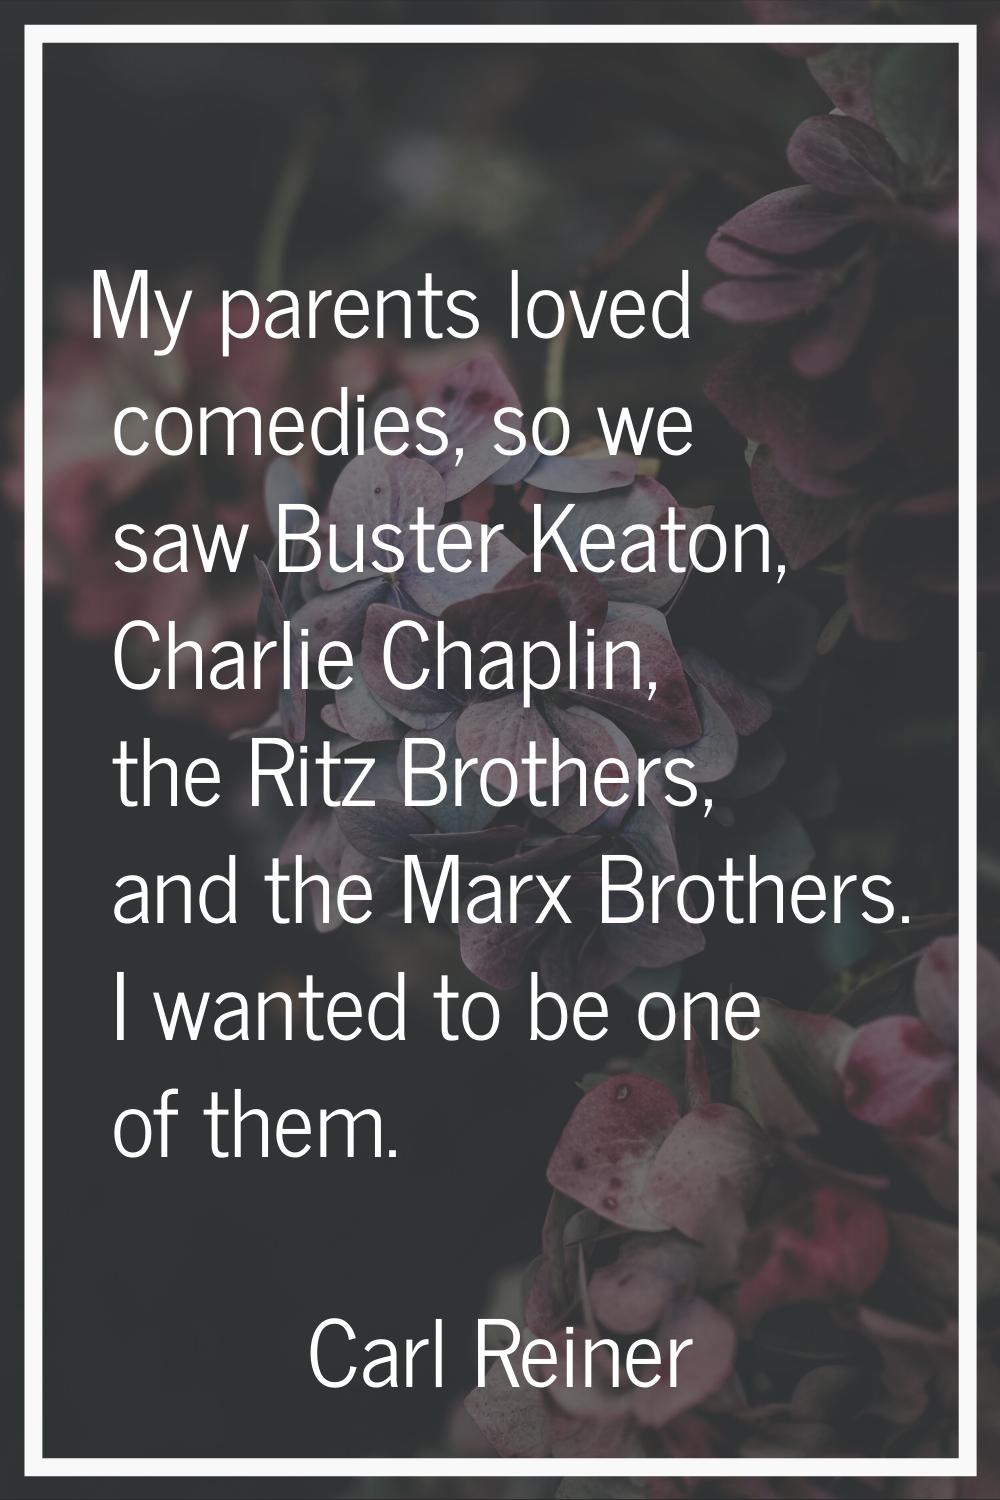 My parents loved comedies, so we saw Buster Keaton, Charlie Chaplin, the Ritz Brothers, and the Mar